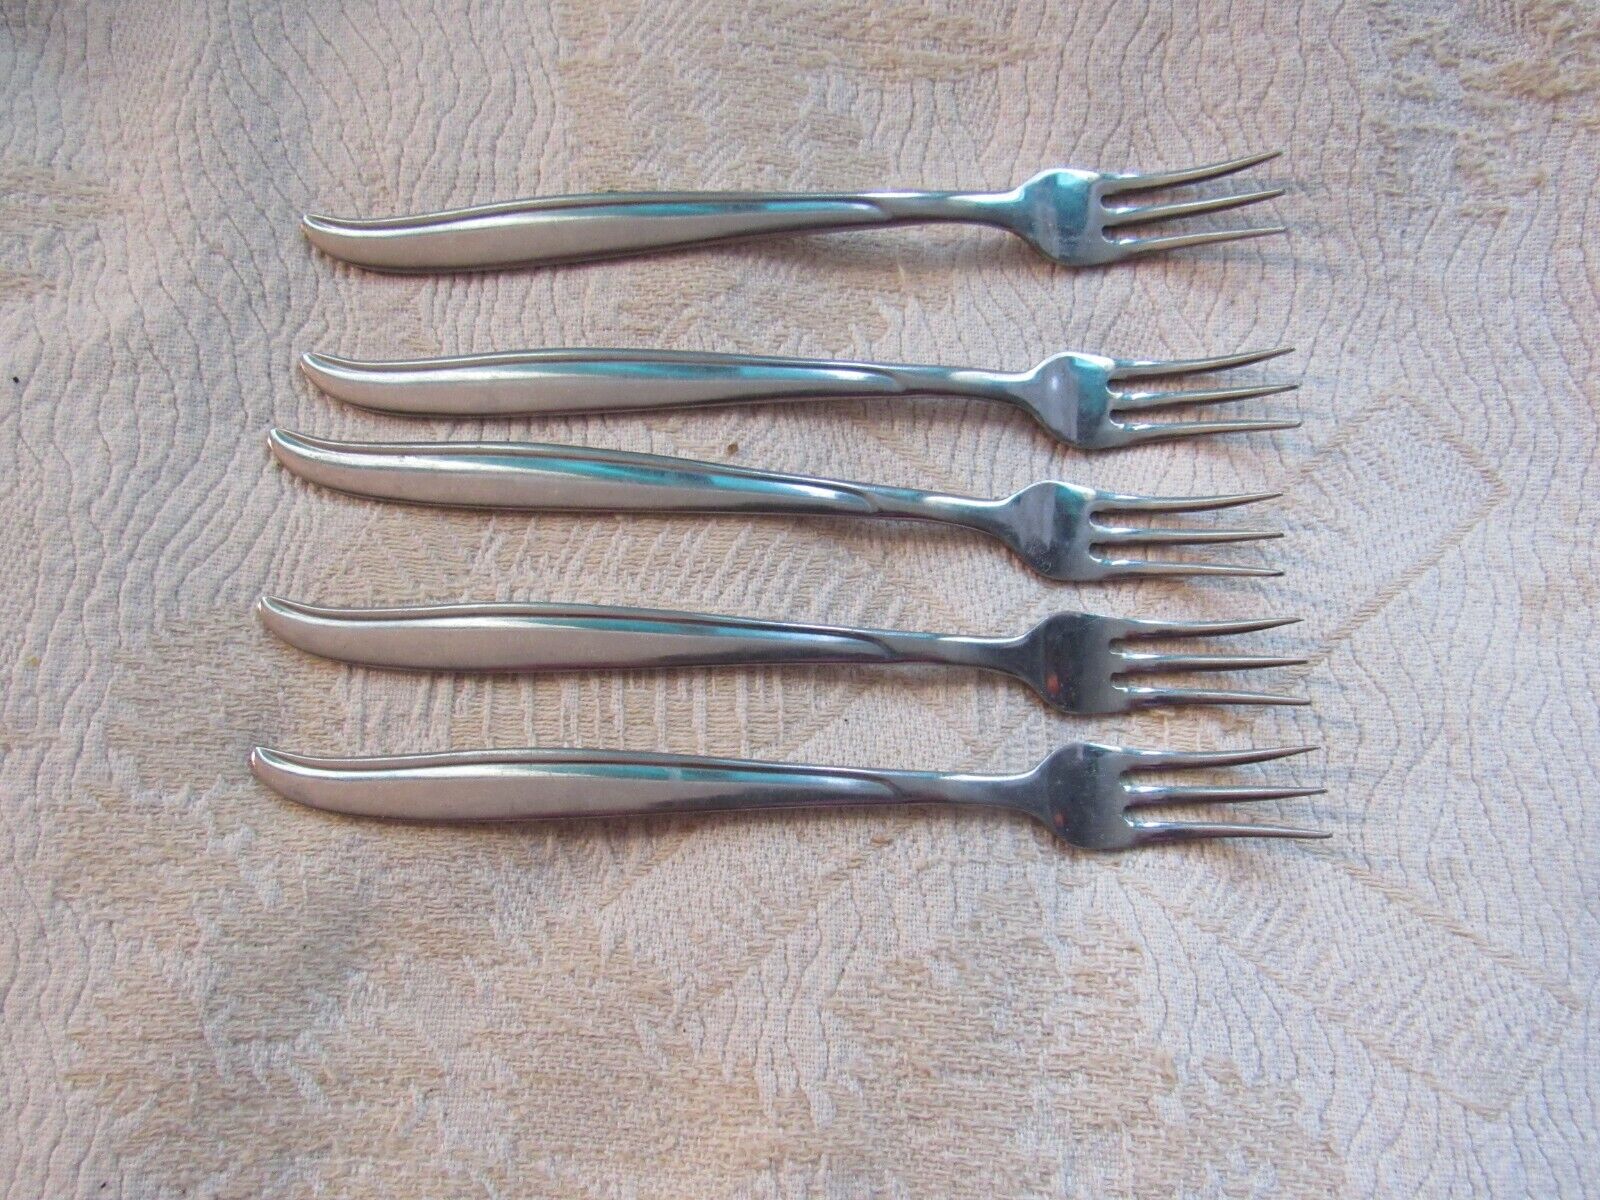 Five Stainless Steel Cocktail Forks N.S.C.O Made in Japan, VINTAGE